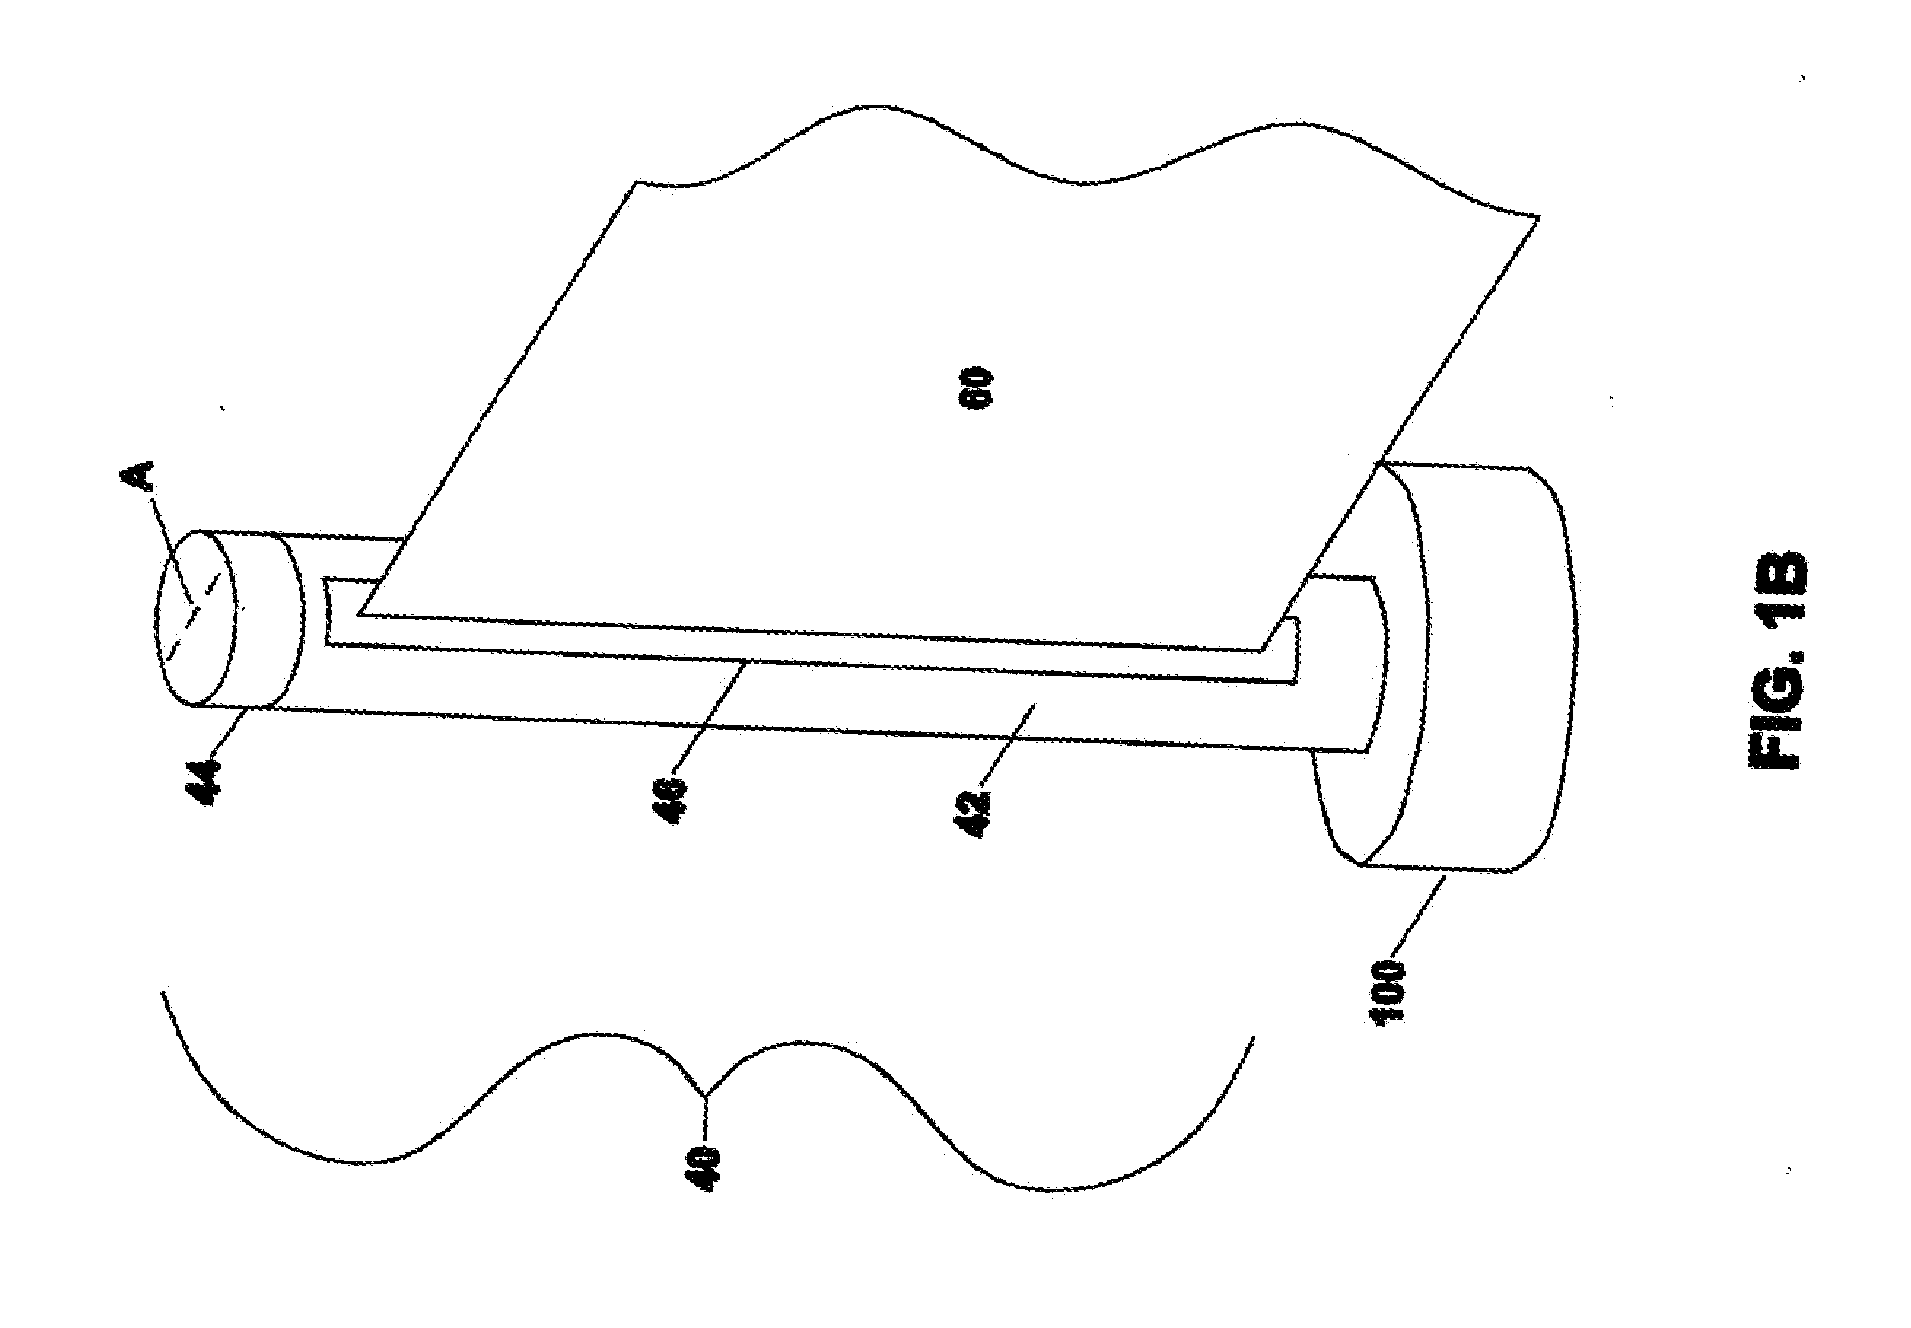 Landscape shield apparatus and method